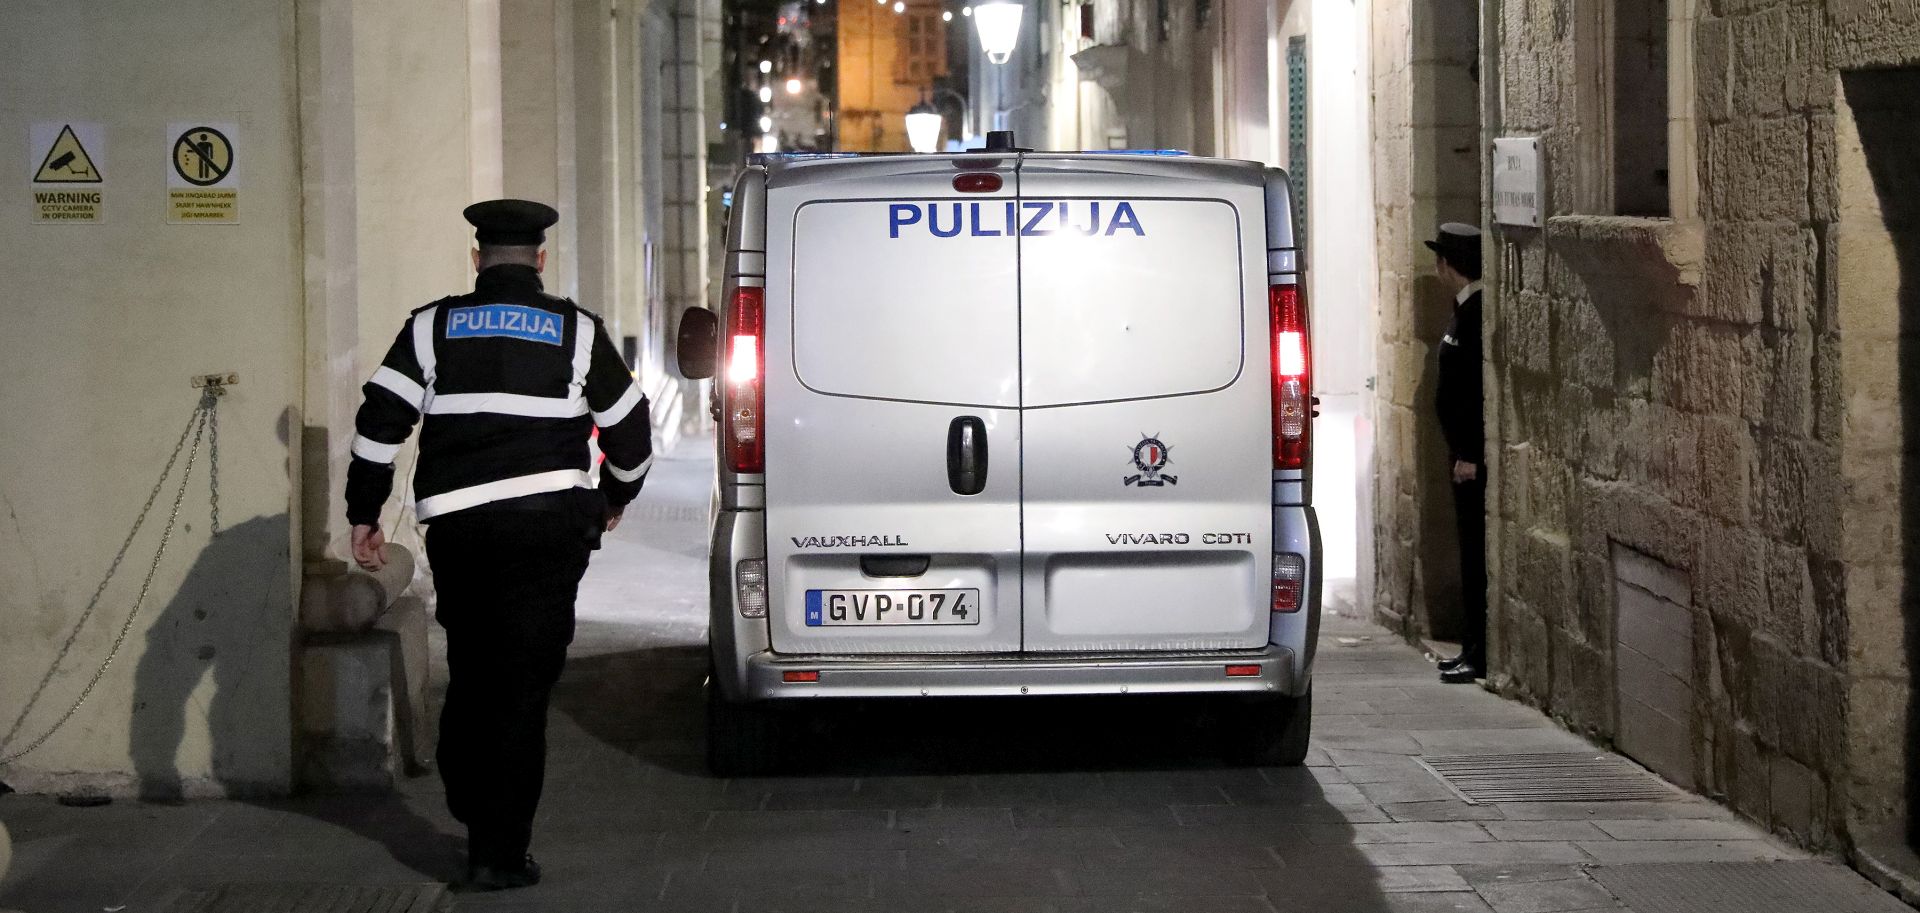 epaselect epa08036210 A police van carrying entrepreneur Yorgen Fenech leaves at the Malta Law Courts in Valletta, Malta, 30 November 2019.
Fenech was arraigned in court and charged with complicity in the murder of journalist Daphne Caruana Galizia. He pleaded not guilty to the charge and others, which include promoting or financing a criminal organisation and conspiracy to commit a crime. If found guilty, he will face up to a lifetime in prison. Maltese authorities had arrested Yorgen Fenech on 20 November as a person of interest in investigations into the October 2017 car bomb murder of Maltese journalist Daphne Caruana Galizia.  EPA/DOMENIC AQUILINA